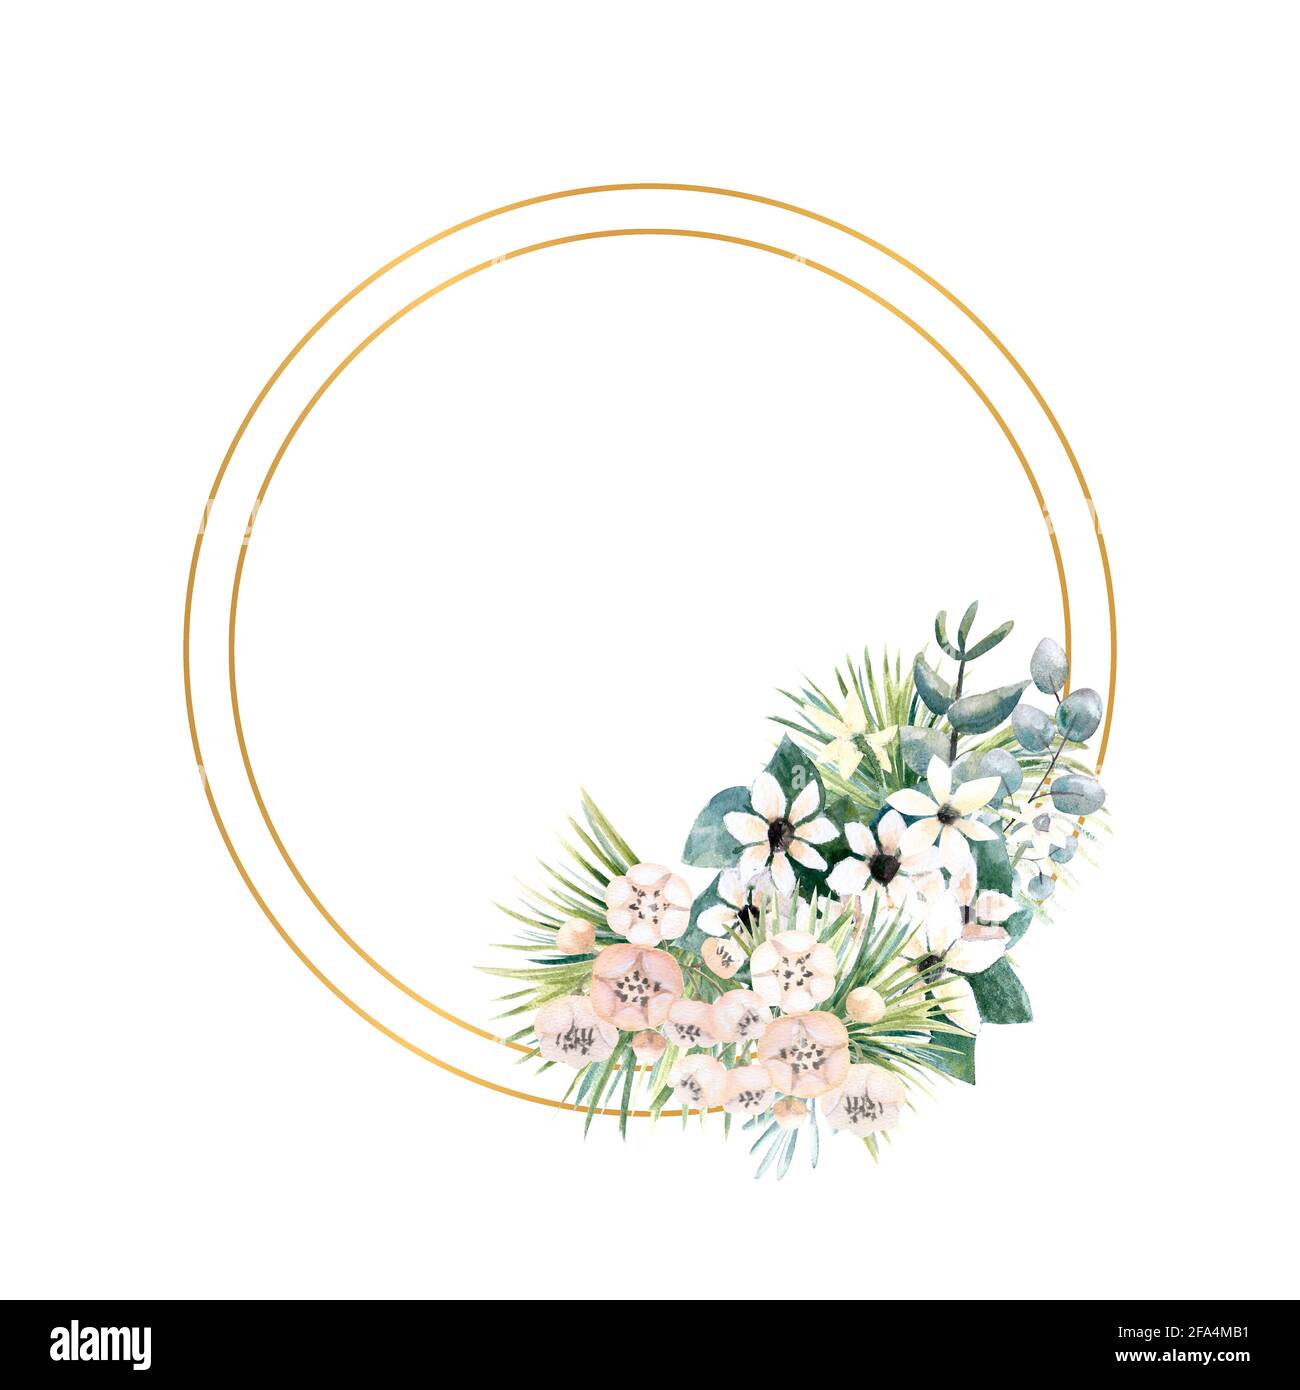 Round gold frame with small flowers of actinidia, bouvardia, tropical and palm leaves. Wedding bouquet in a frame for the design of a stylish Stock Photo